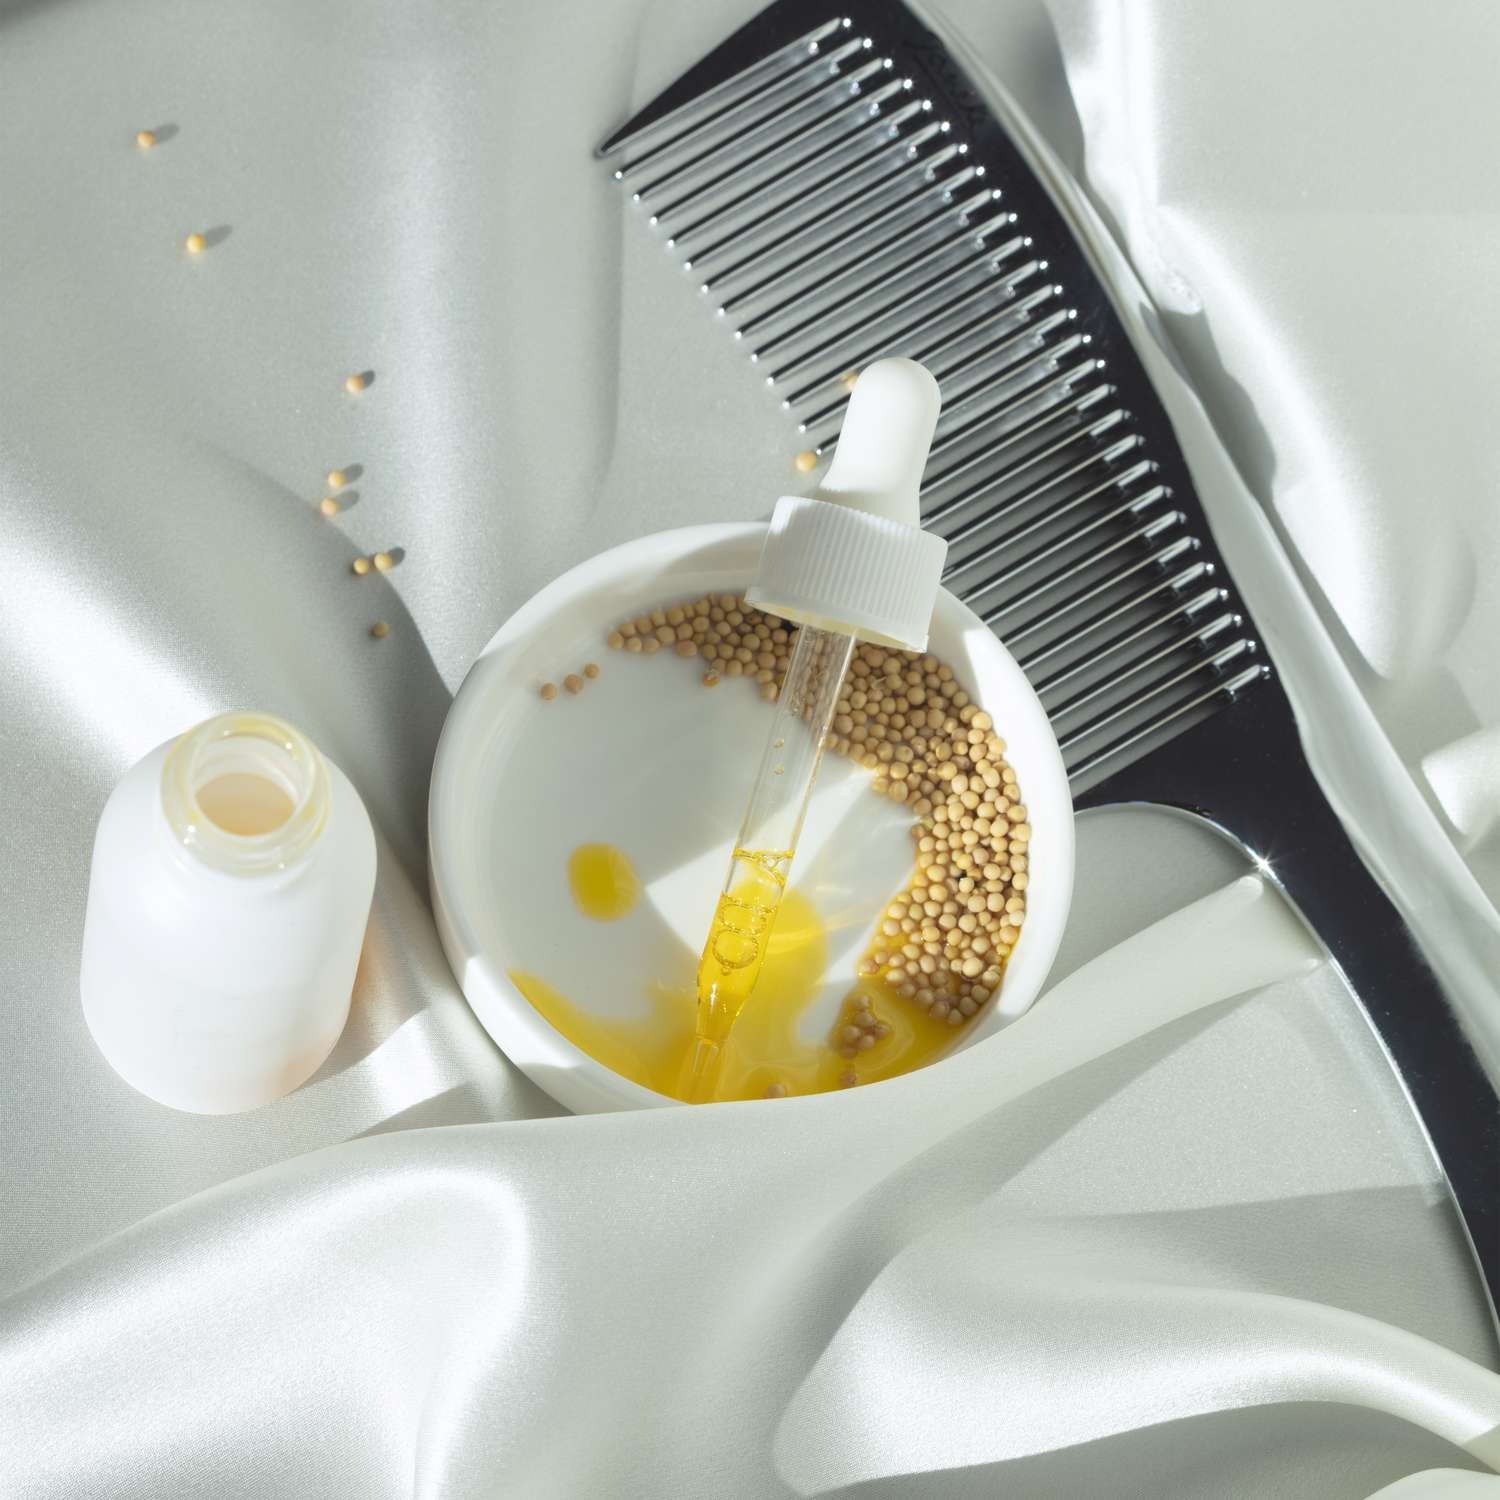 A comb, mustard seeds, and oil